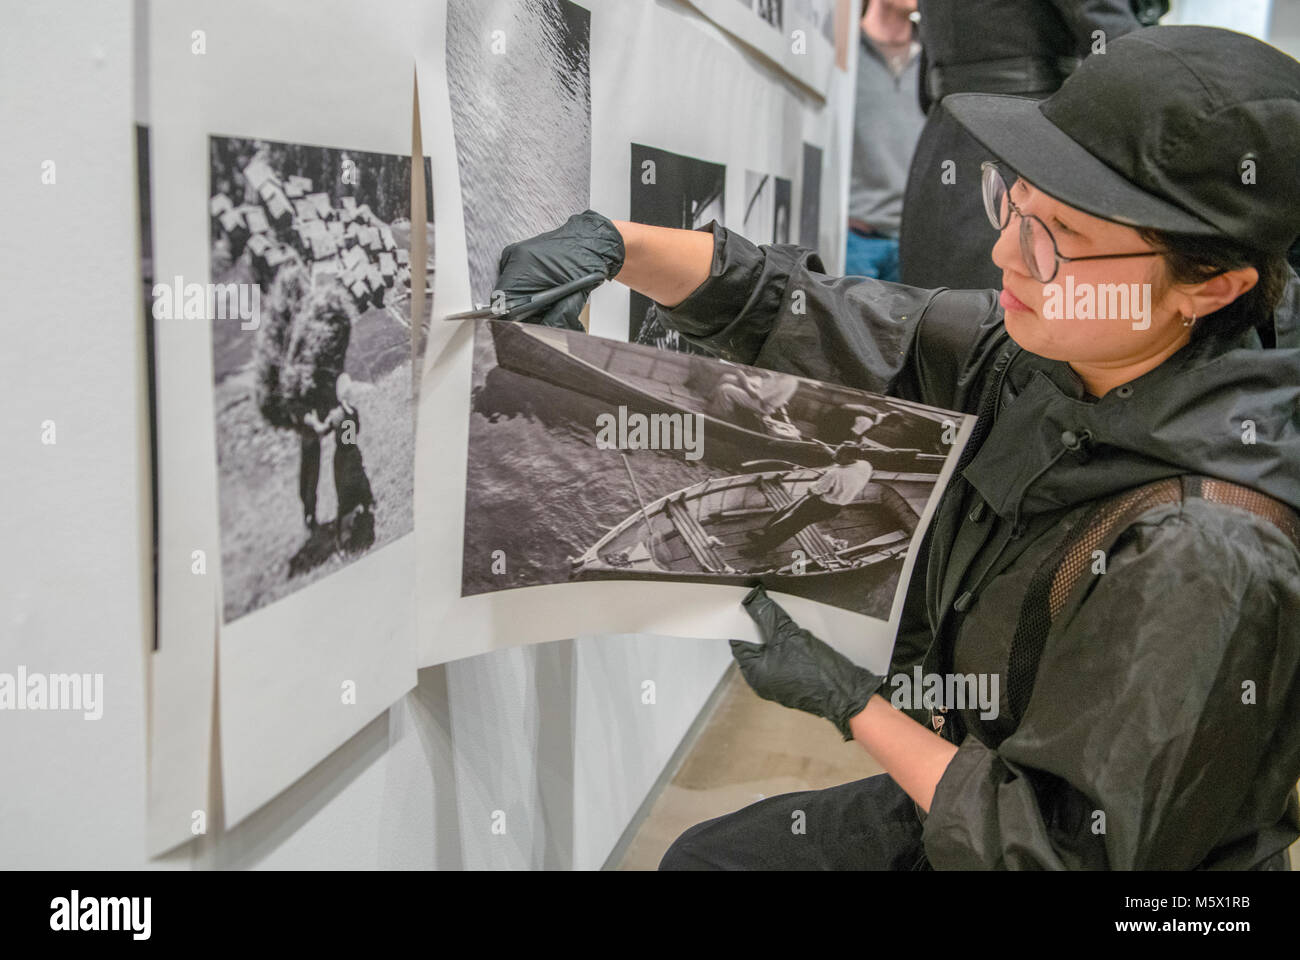 Portland, Oregon, USA. 26 FEB, 2018. A performance artist cuts the work of the photographer Robert Frank from the wall at Blue Sky Gallery in Portland, Oregon, USA. The work was destroyed in a “Destruction Dance” performance defacing the photographs with ink and mutilation with scissors, knives and even ice skates  at the end of it’s run. The destruction was Frank's protest regarding today's greed in the global art market. Credit: Ken Hawkins/Alamy Live News Stock Photo